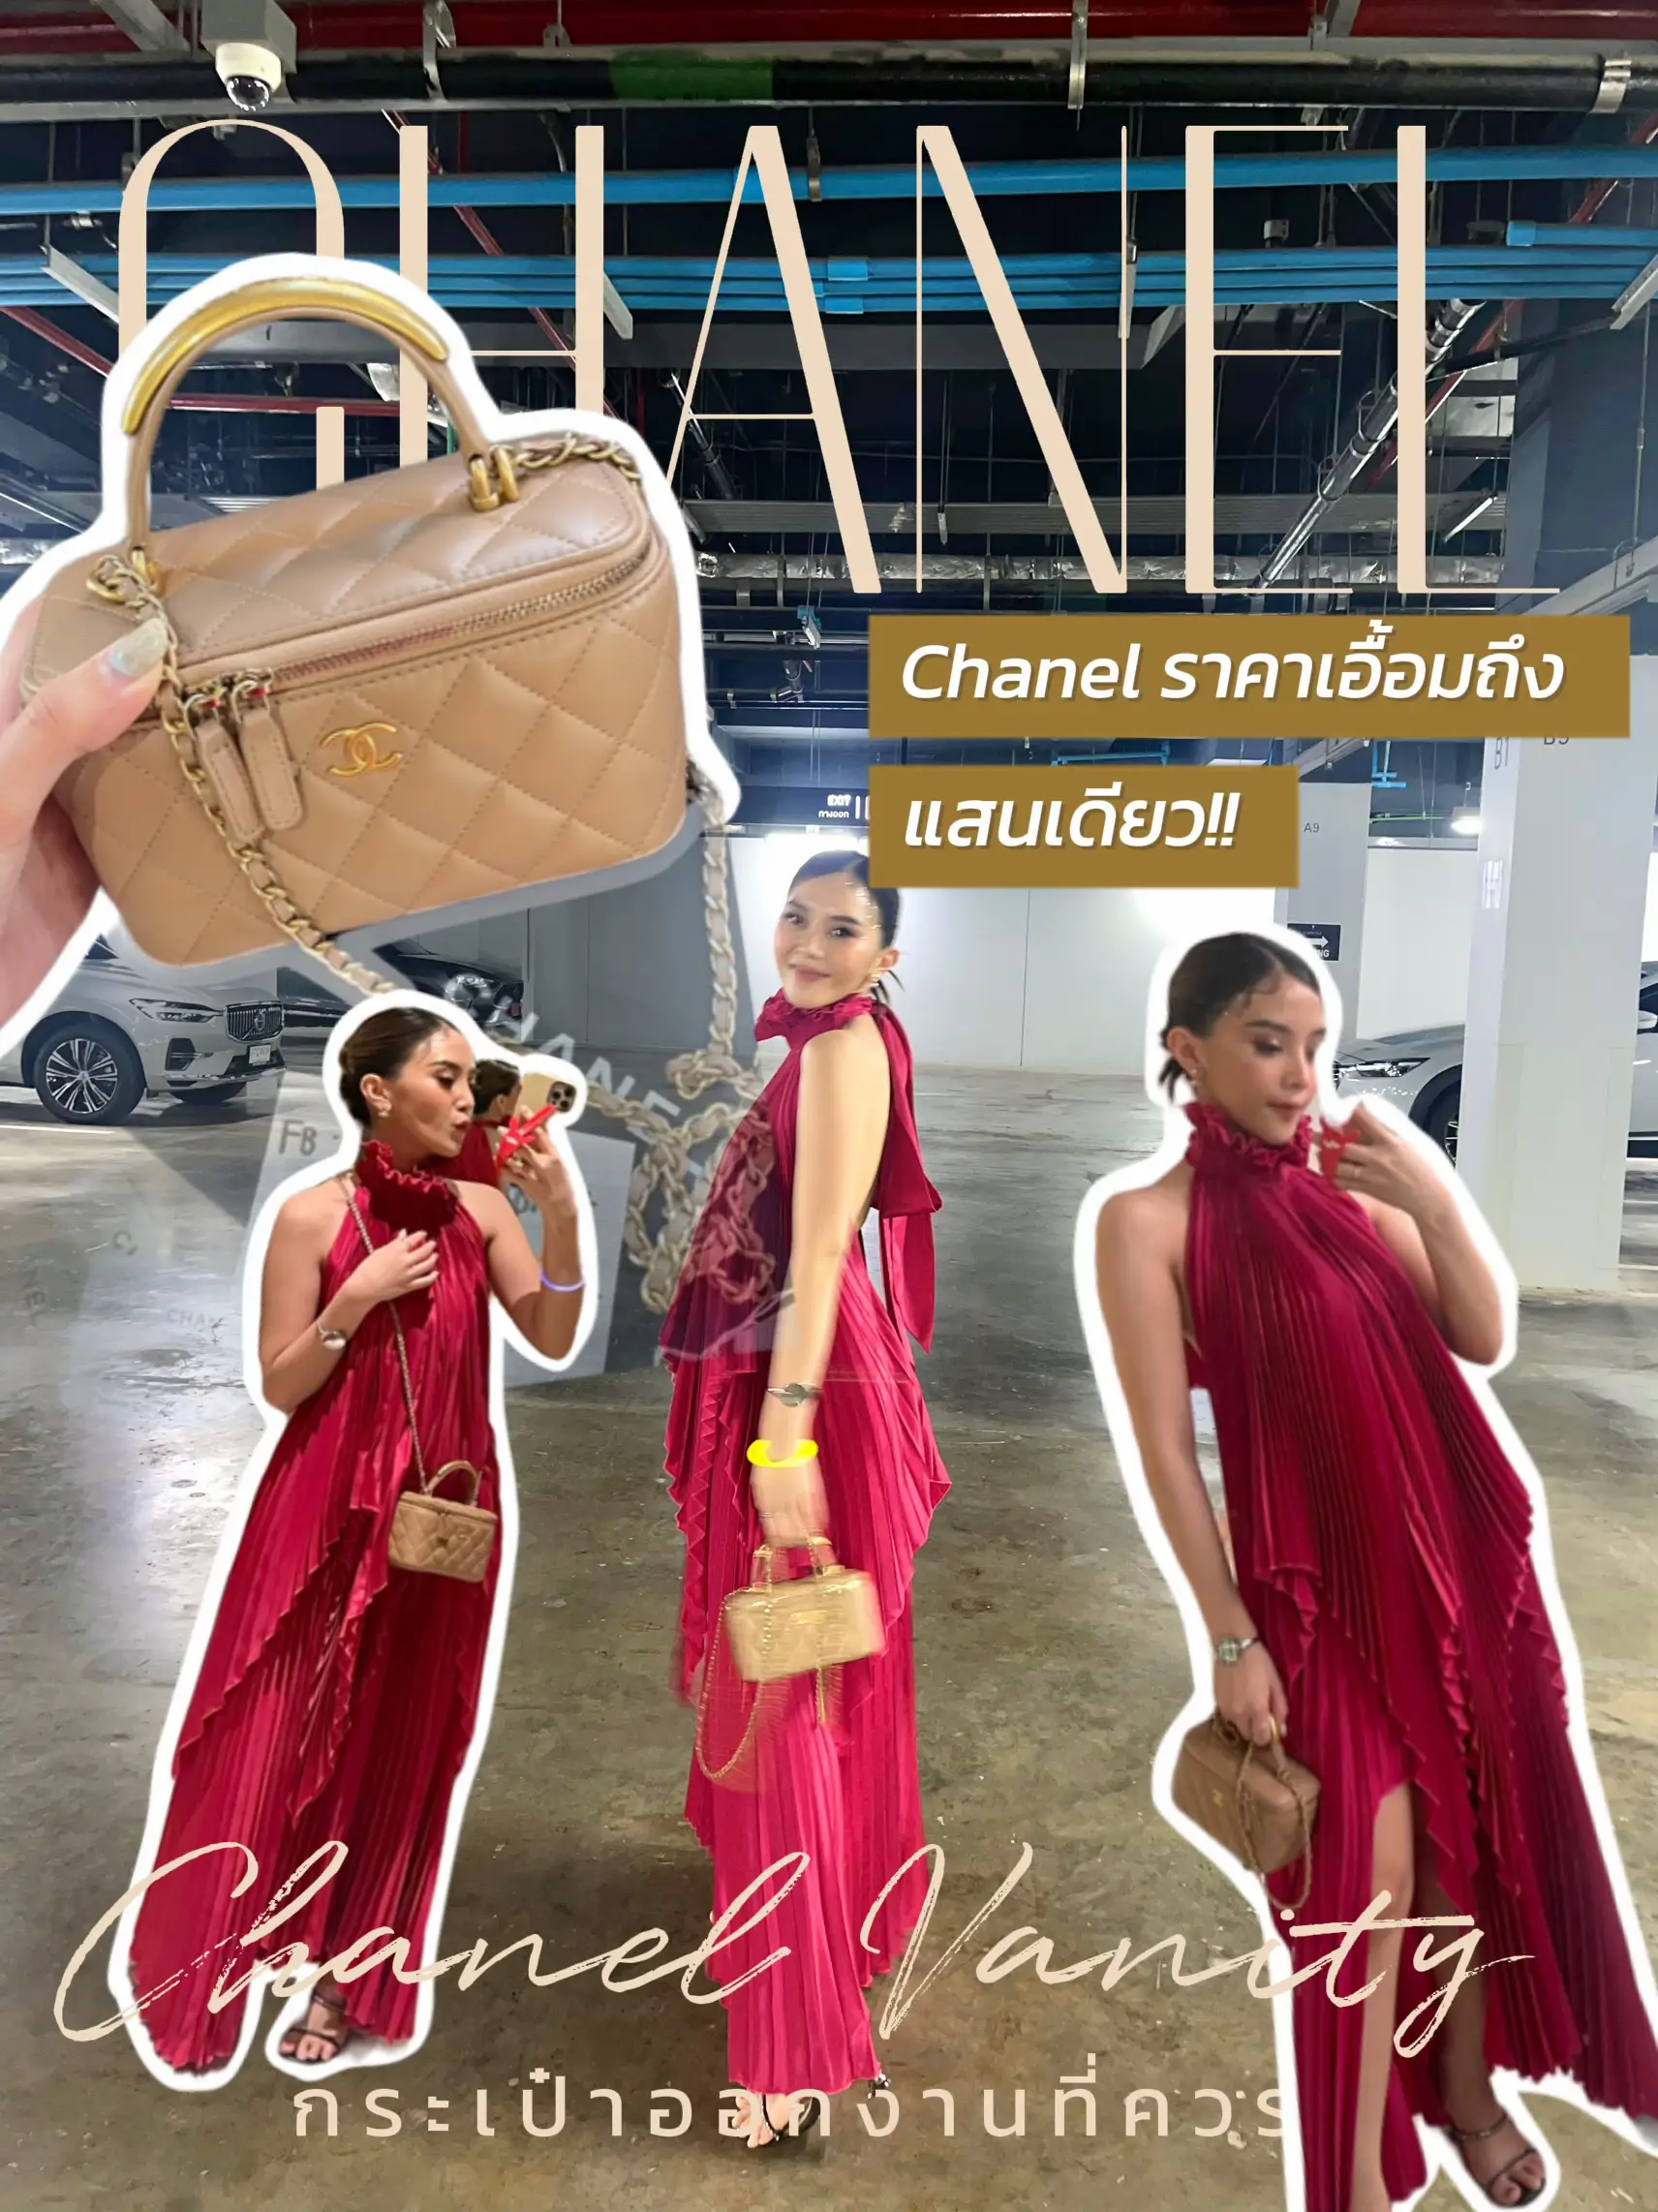 Chanel Vanity Chanel Bag In Reach (One Hundred Thousand)✨, Gallery posted  by jiraphatc